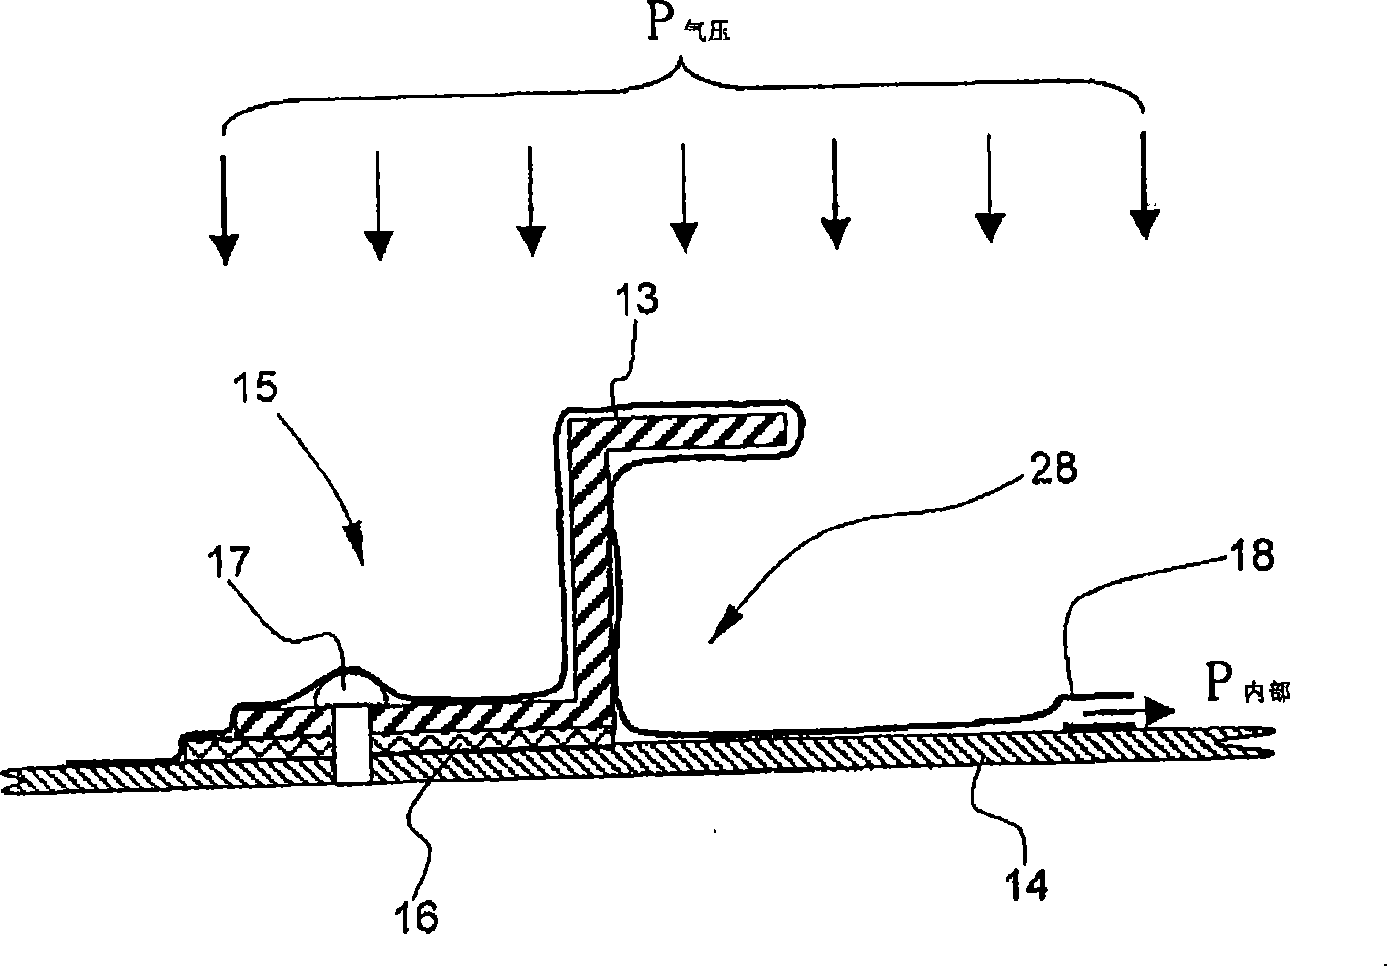 Method for autoclave-free adhesive bonding of components for aircraft